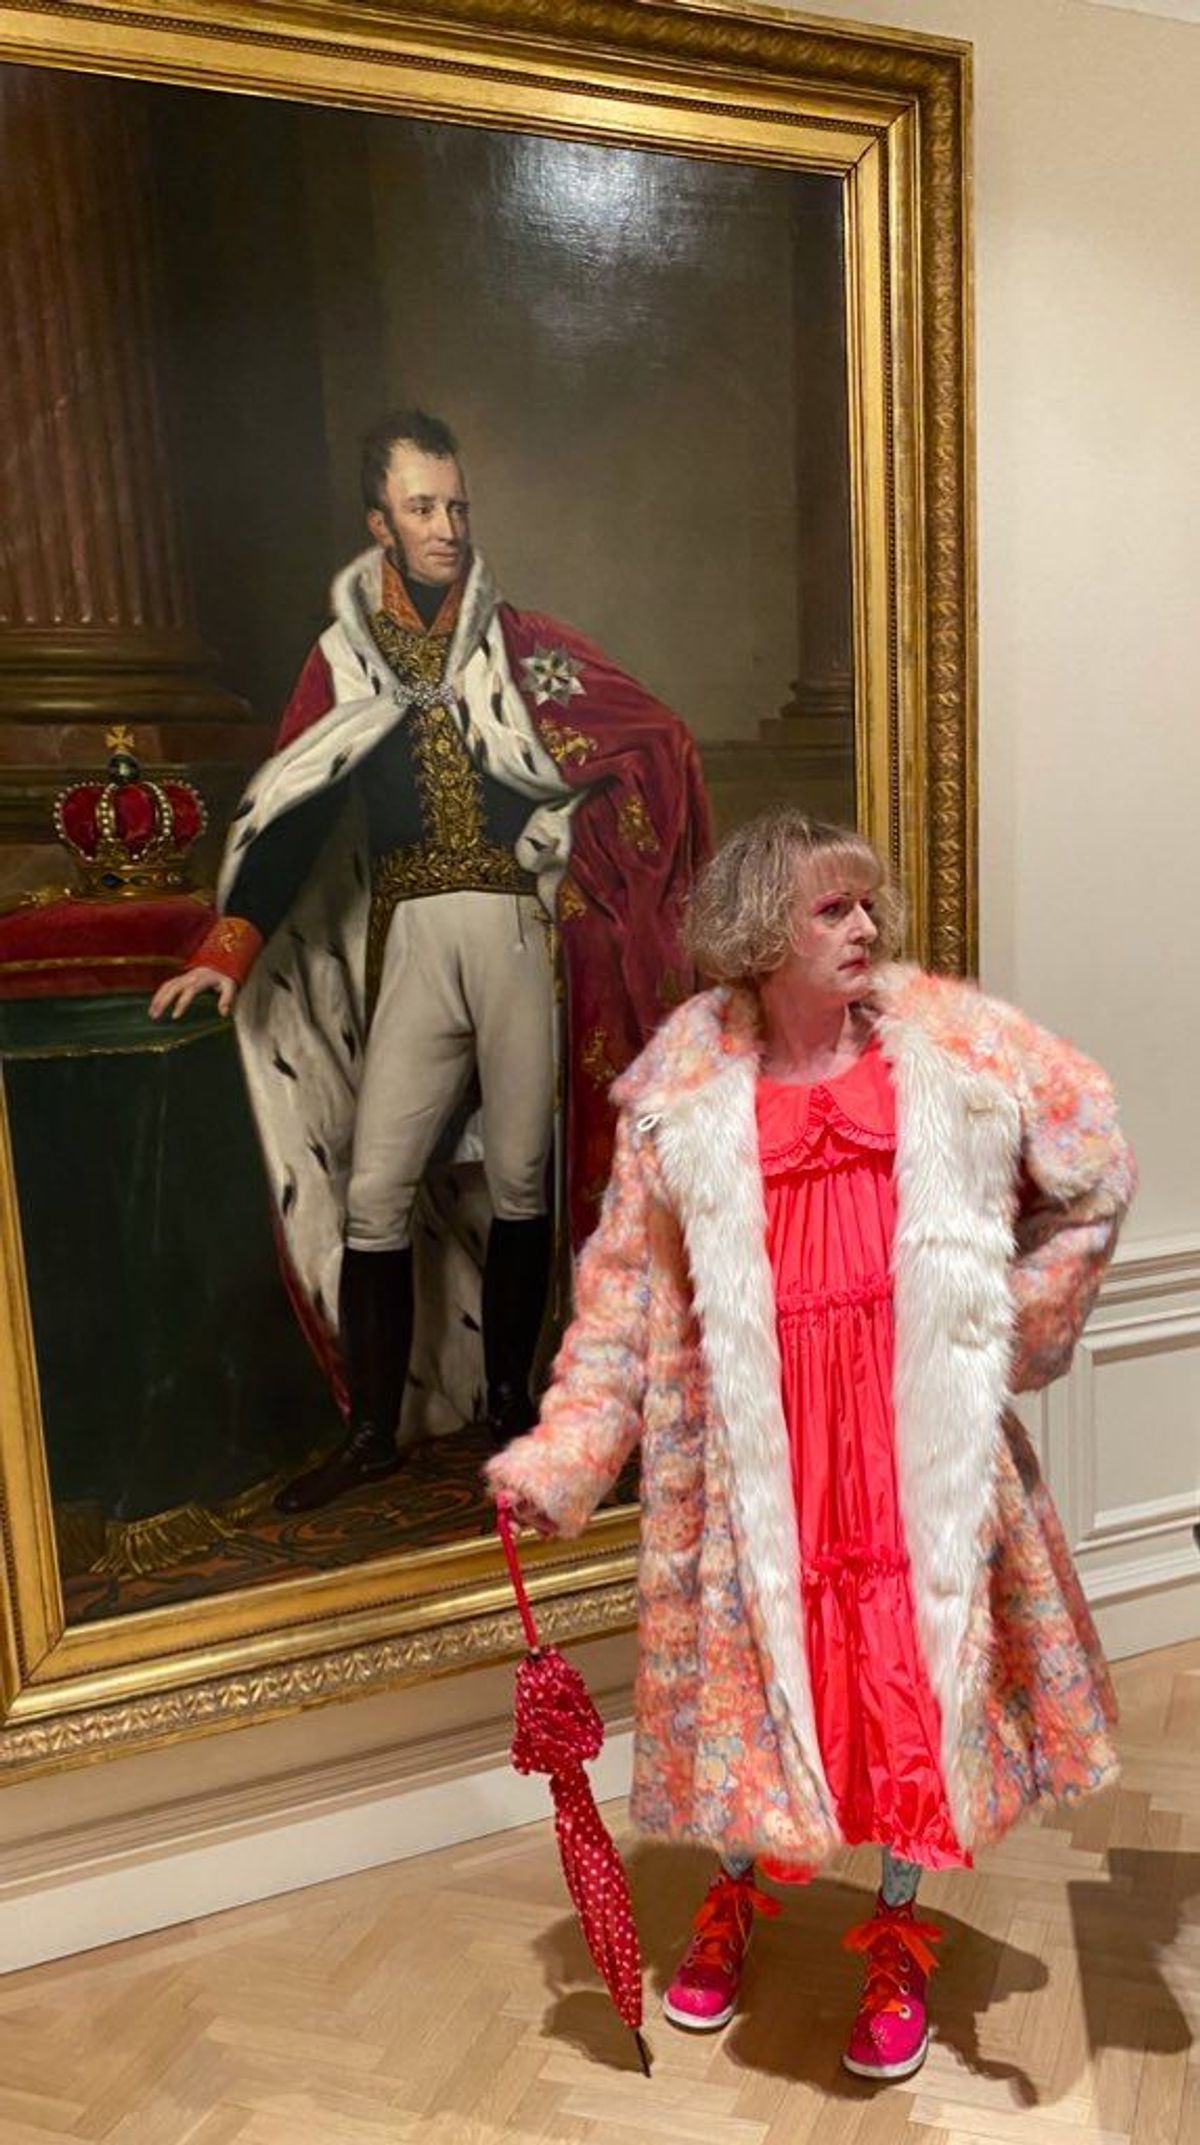 Grayson Perry poses alongside the art at the Dutch ambassador's residence in London